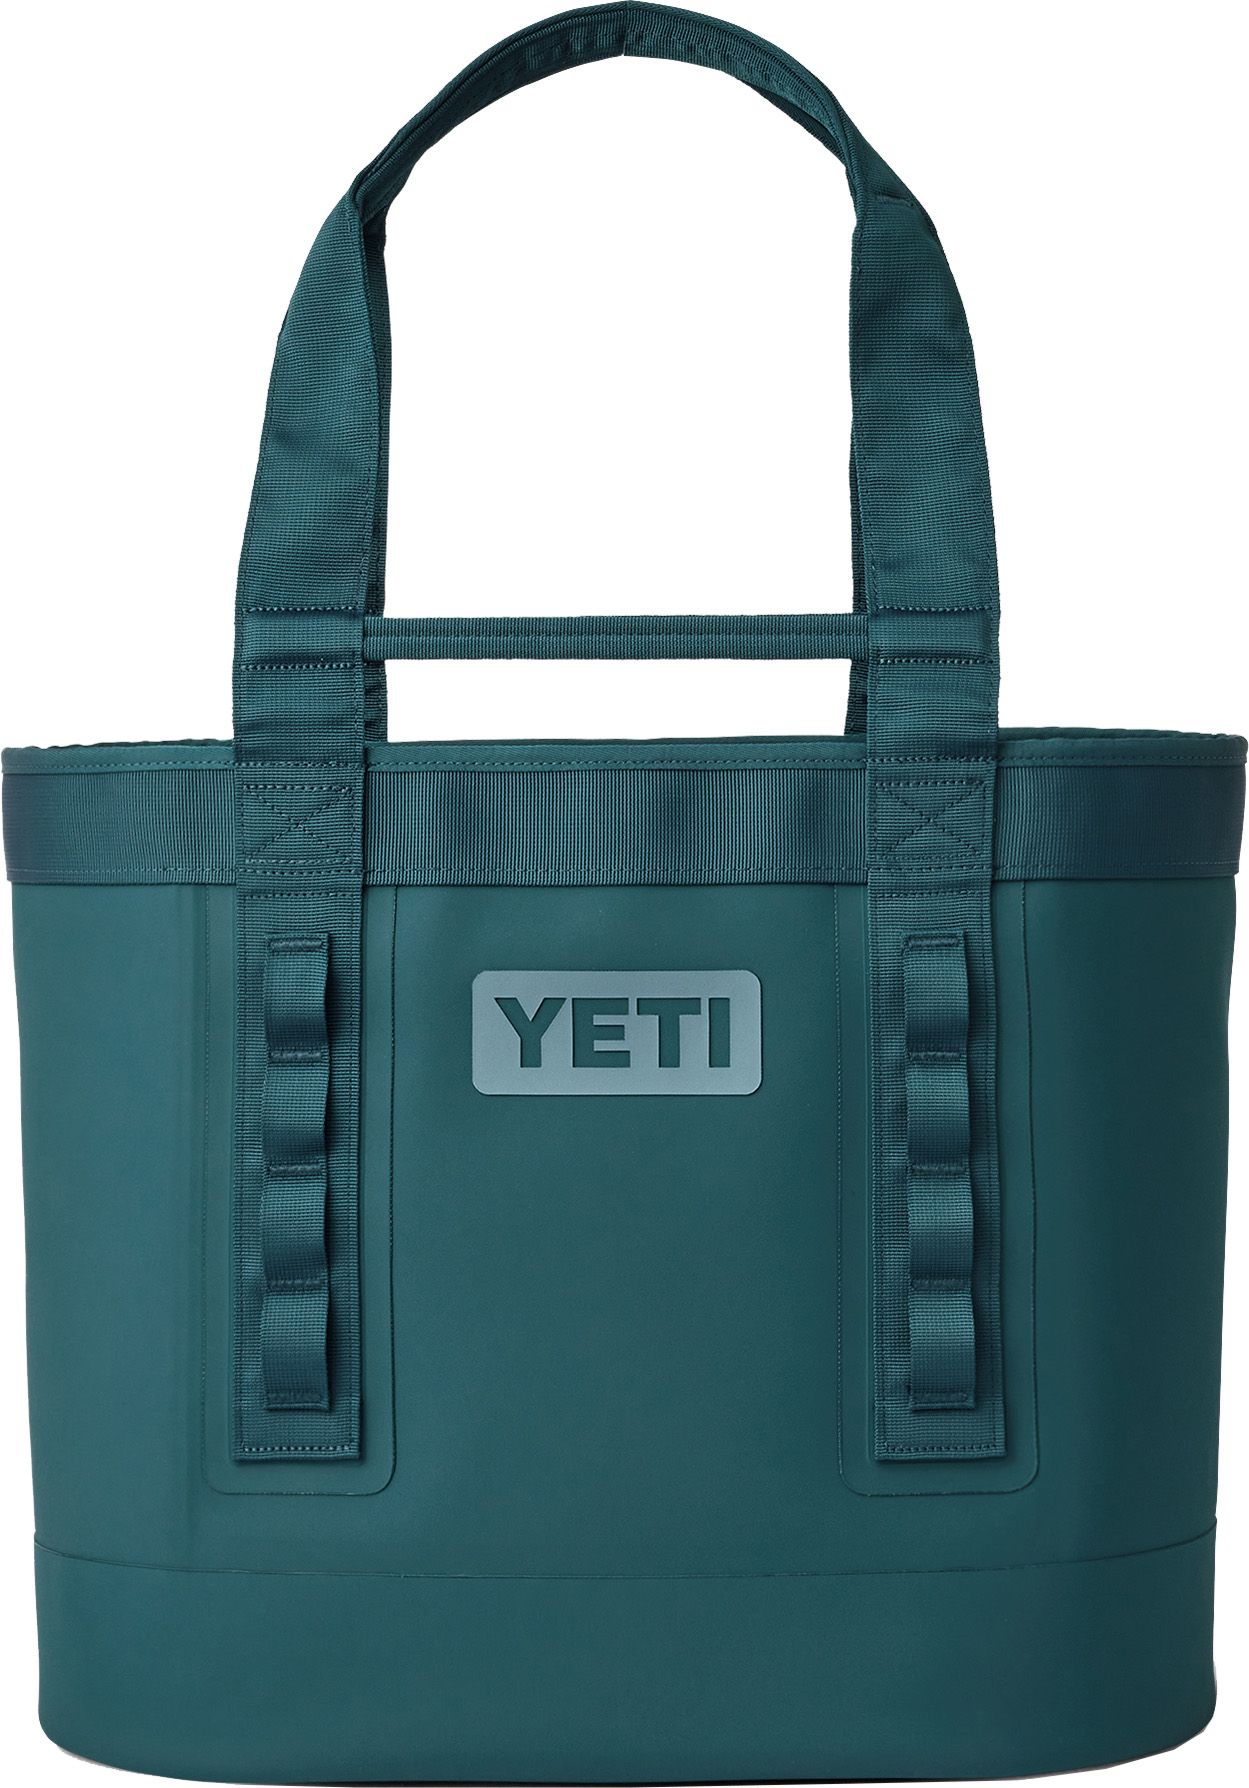 Photos - Suitcase / Backpack Cover Yeti Camino 35 Carryall 2.0 Tote Bag, Men's, Agave Teal 21YETUCMNCRRYLL35R 